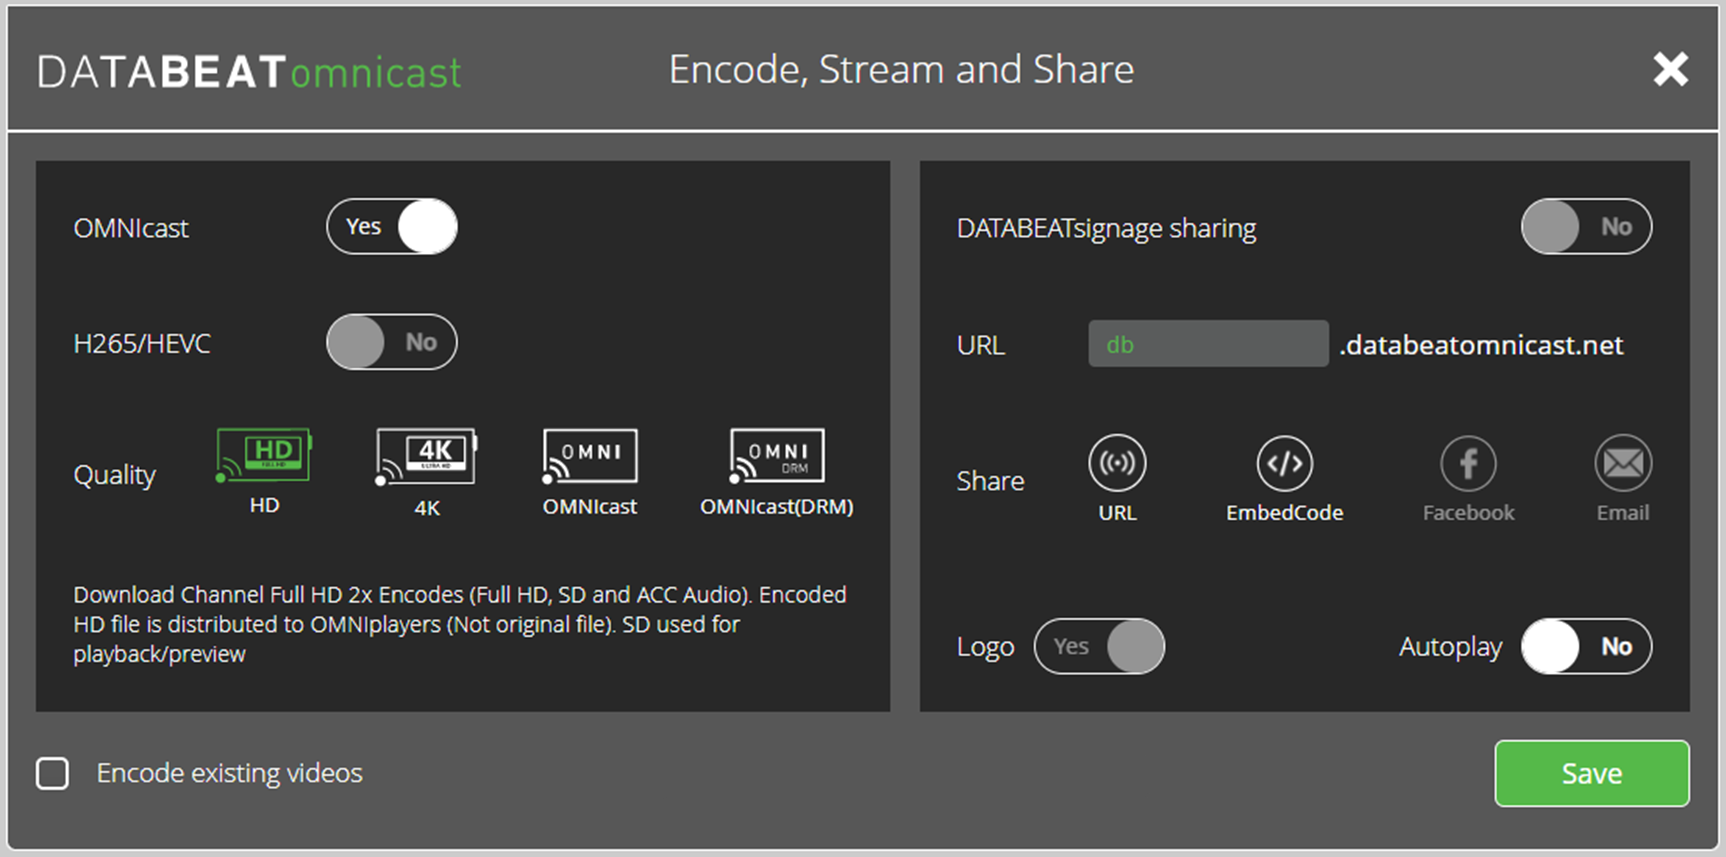 Encode, Stream and Share OMNIcast